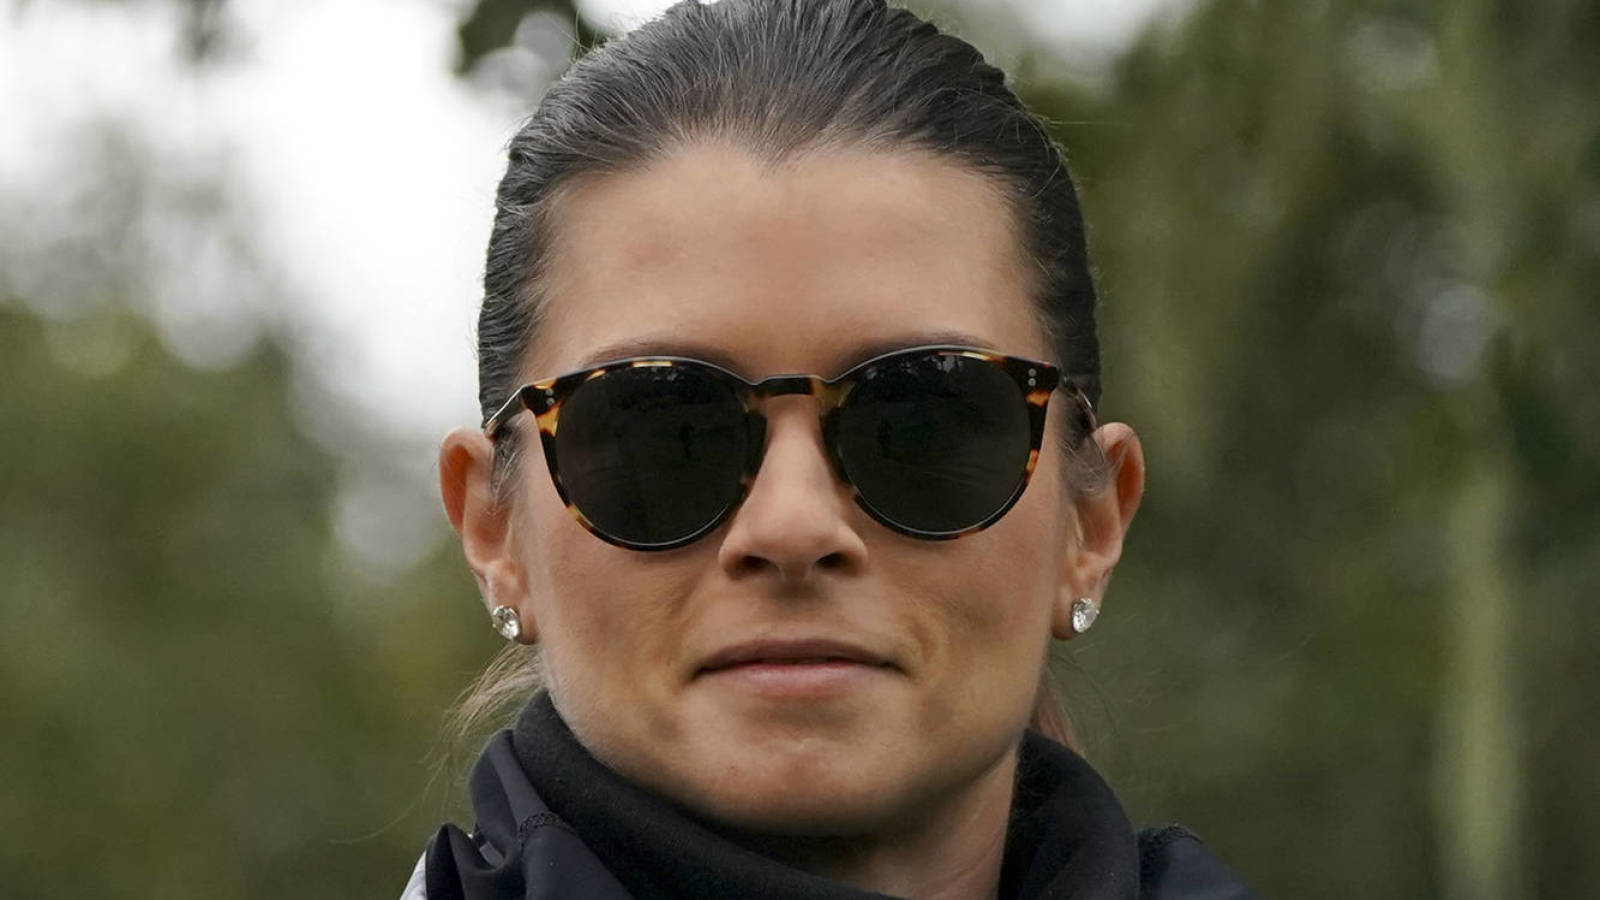 Danica Patrick had surprising first career she wanted to pursue